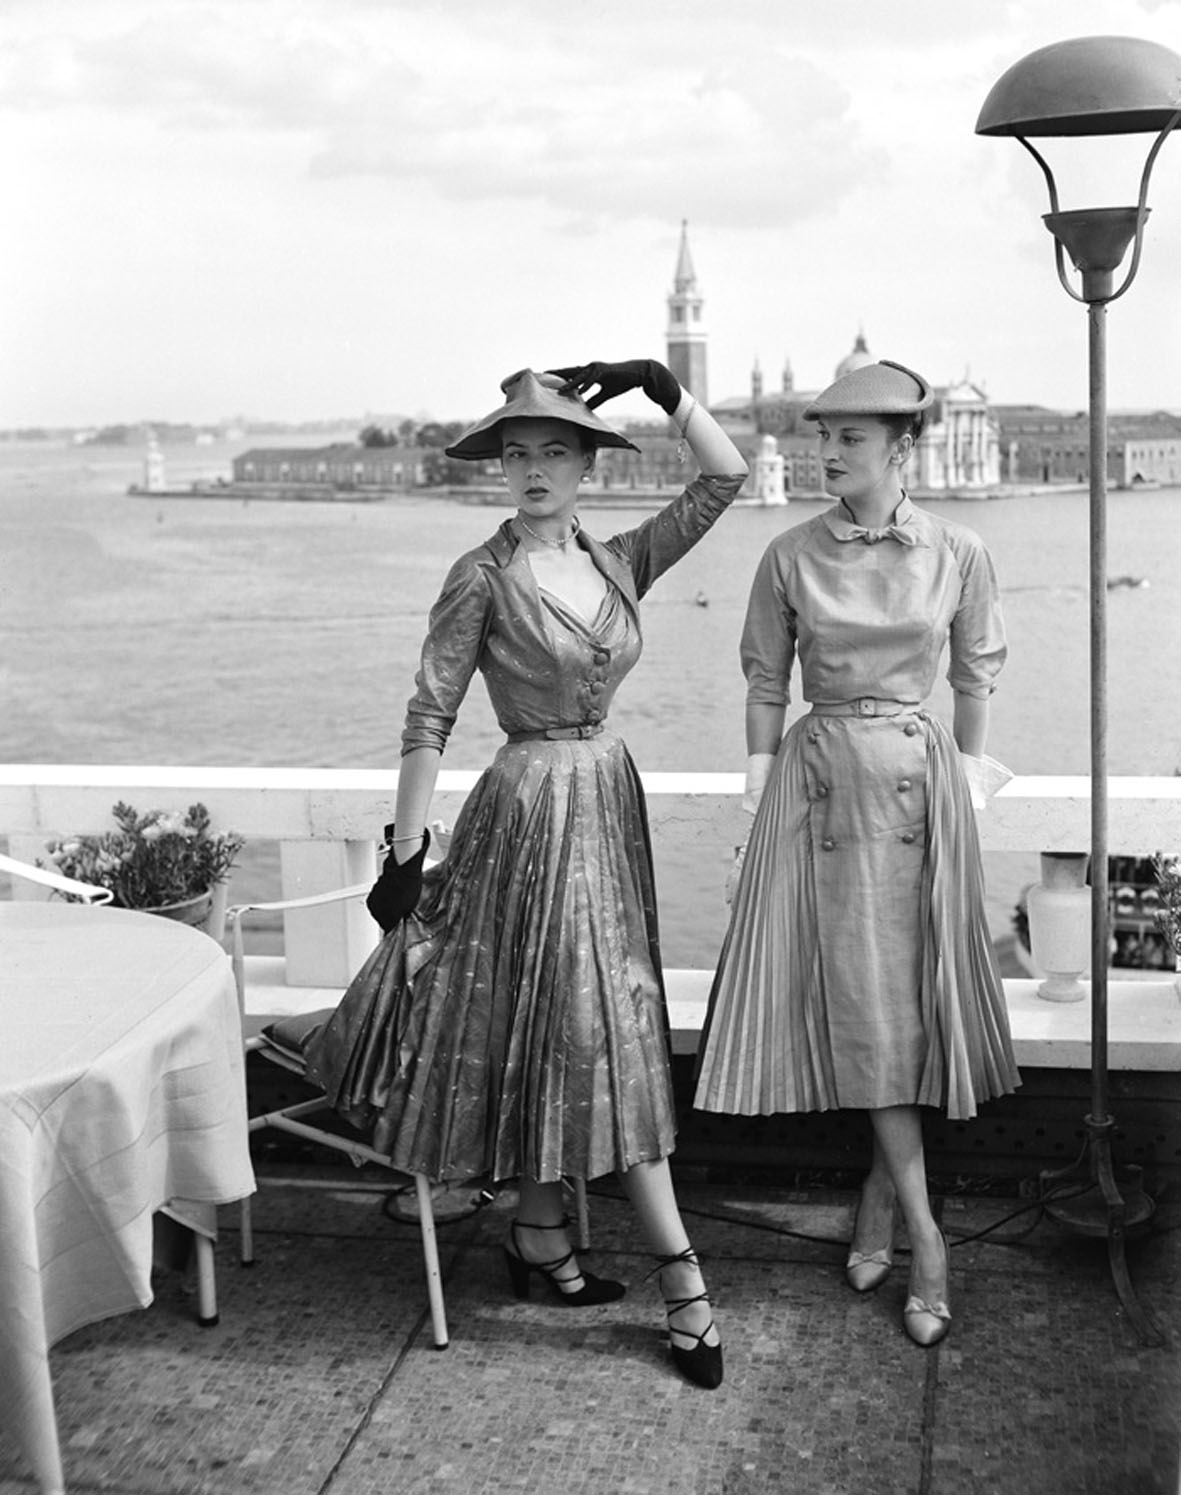 Models wearing Christian Dior fashions near the Piazza San Marco in Venice, 3rd June 1951. The island of San Giorgio Maggiore is visible in the background. (Photo by Archivio Cameraphoto Epoche/Getty Images)